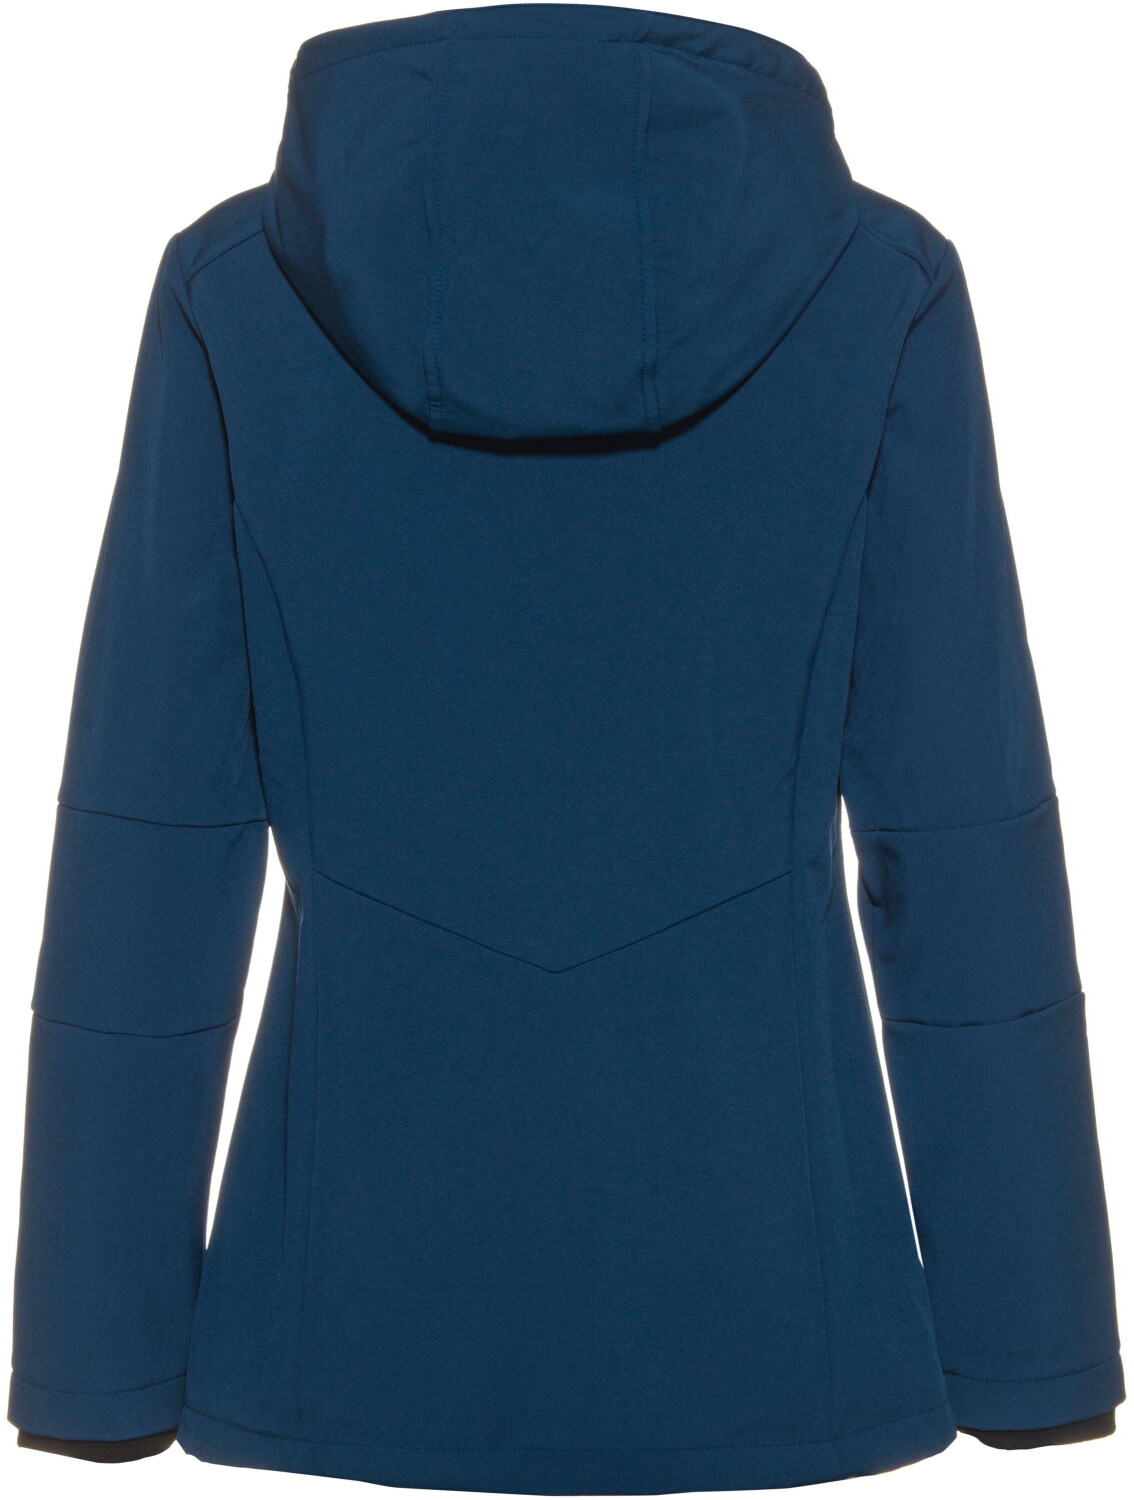 With Fit blue Woman Softshell 39,99 Long CMP (3A22226) ab blue | Jacket bei Preisvergleich € ink/cristal Comfortable